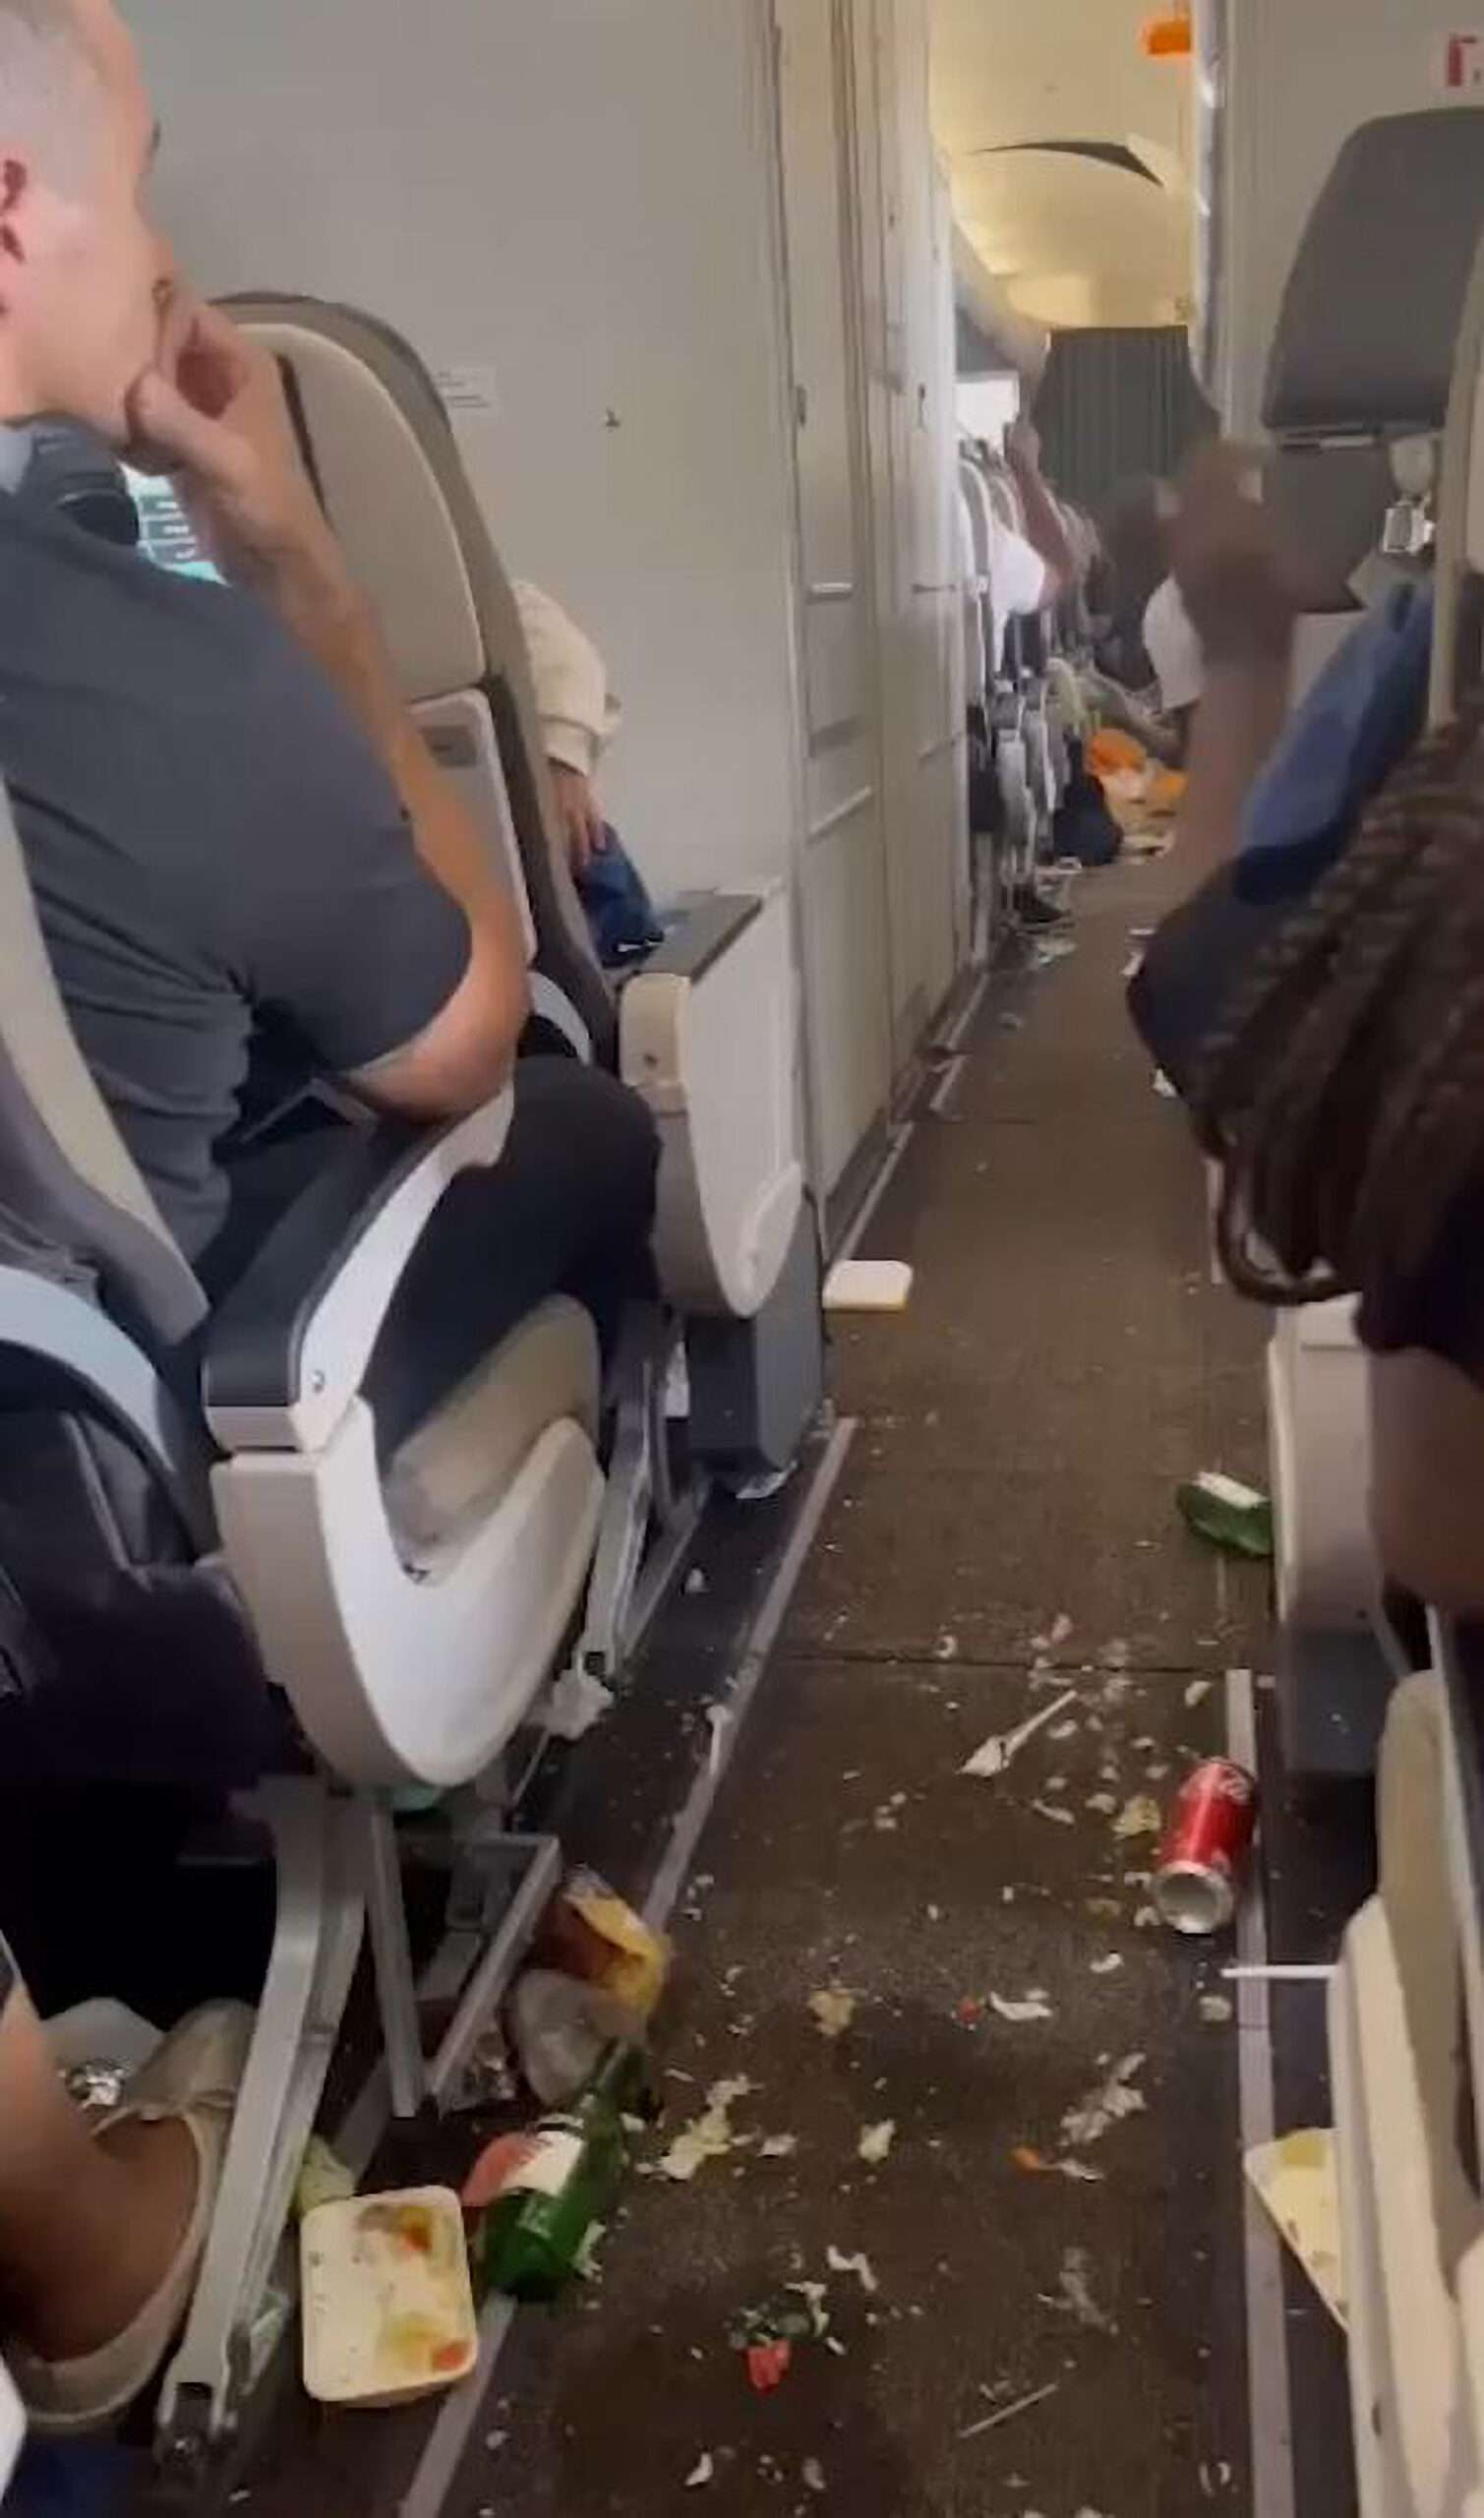 Read more about the article CABIN CHAOS: Strong Turbulence Hits Long-Haul Flight To Portugal, Injuring 10